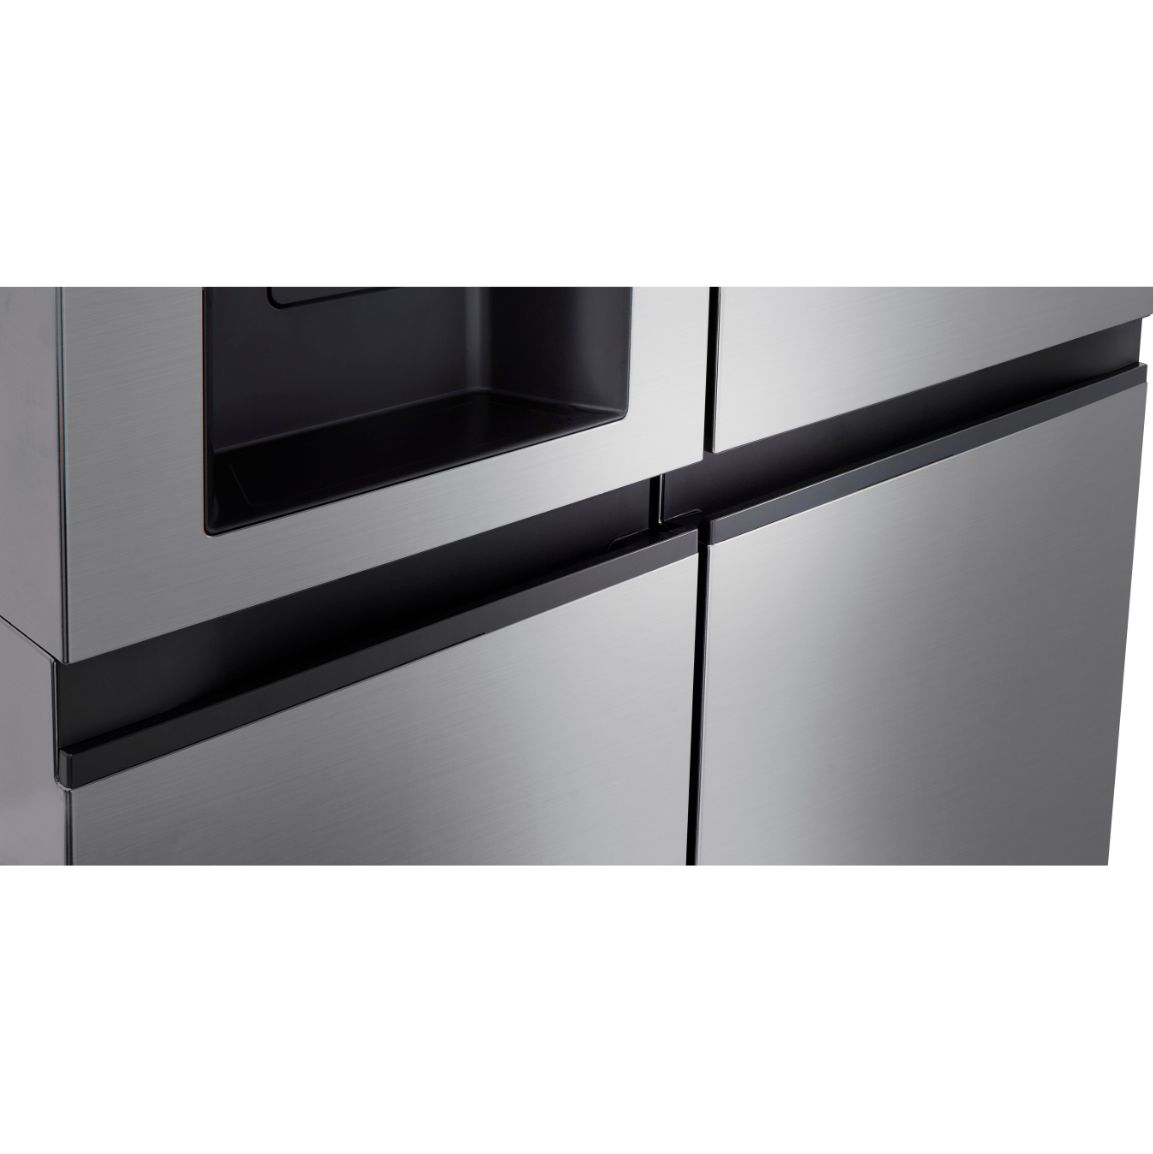 LG 36 Inch Side-by-Side Refrigerator in Stainless Steel Look 27 Cu. Ft. (LRSXS2706V)